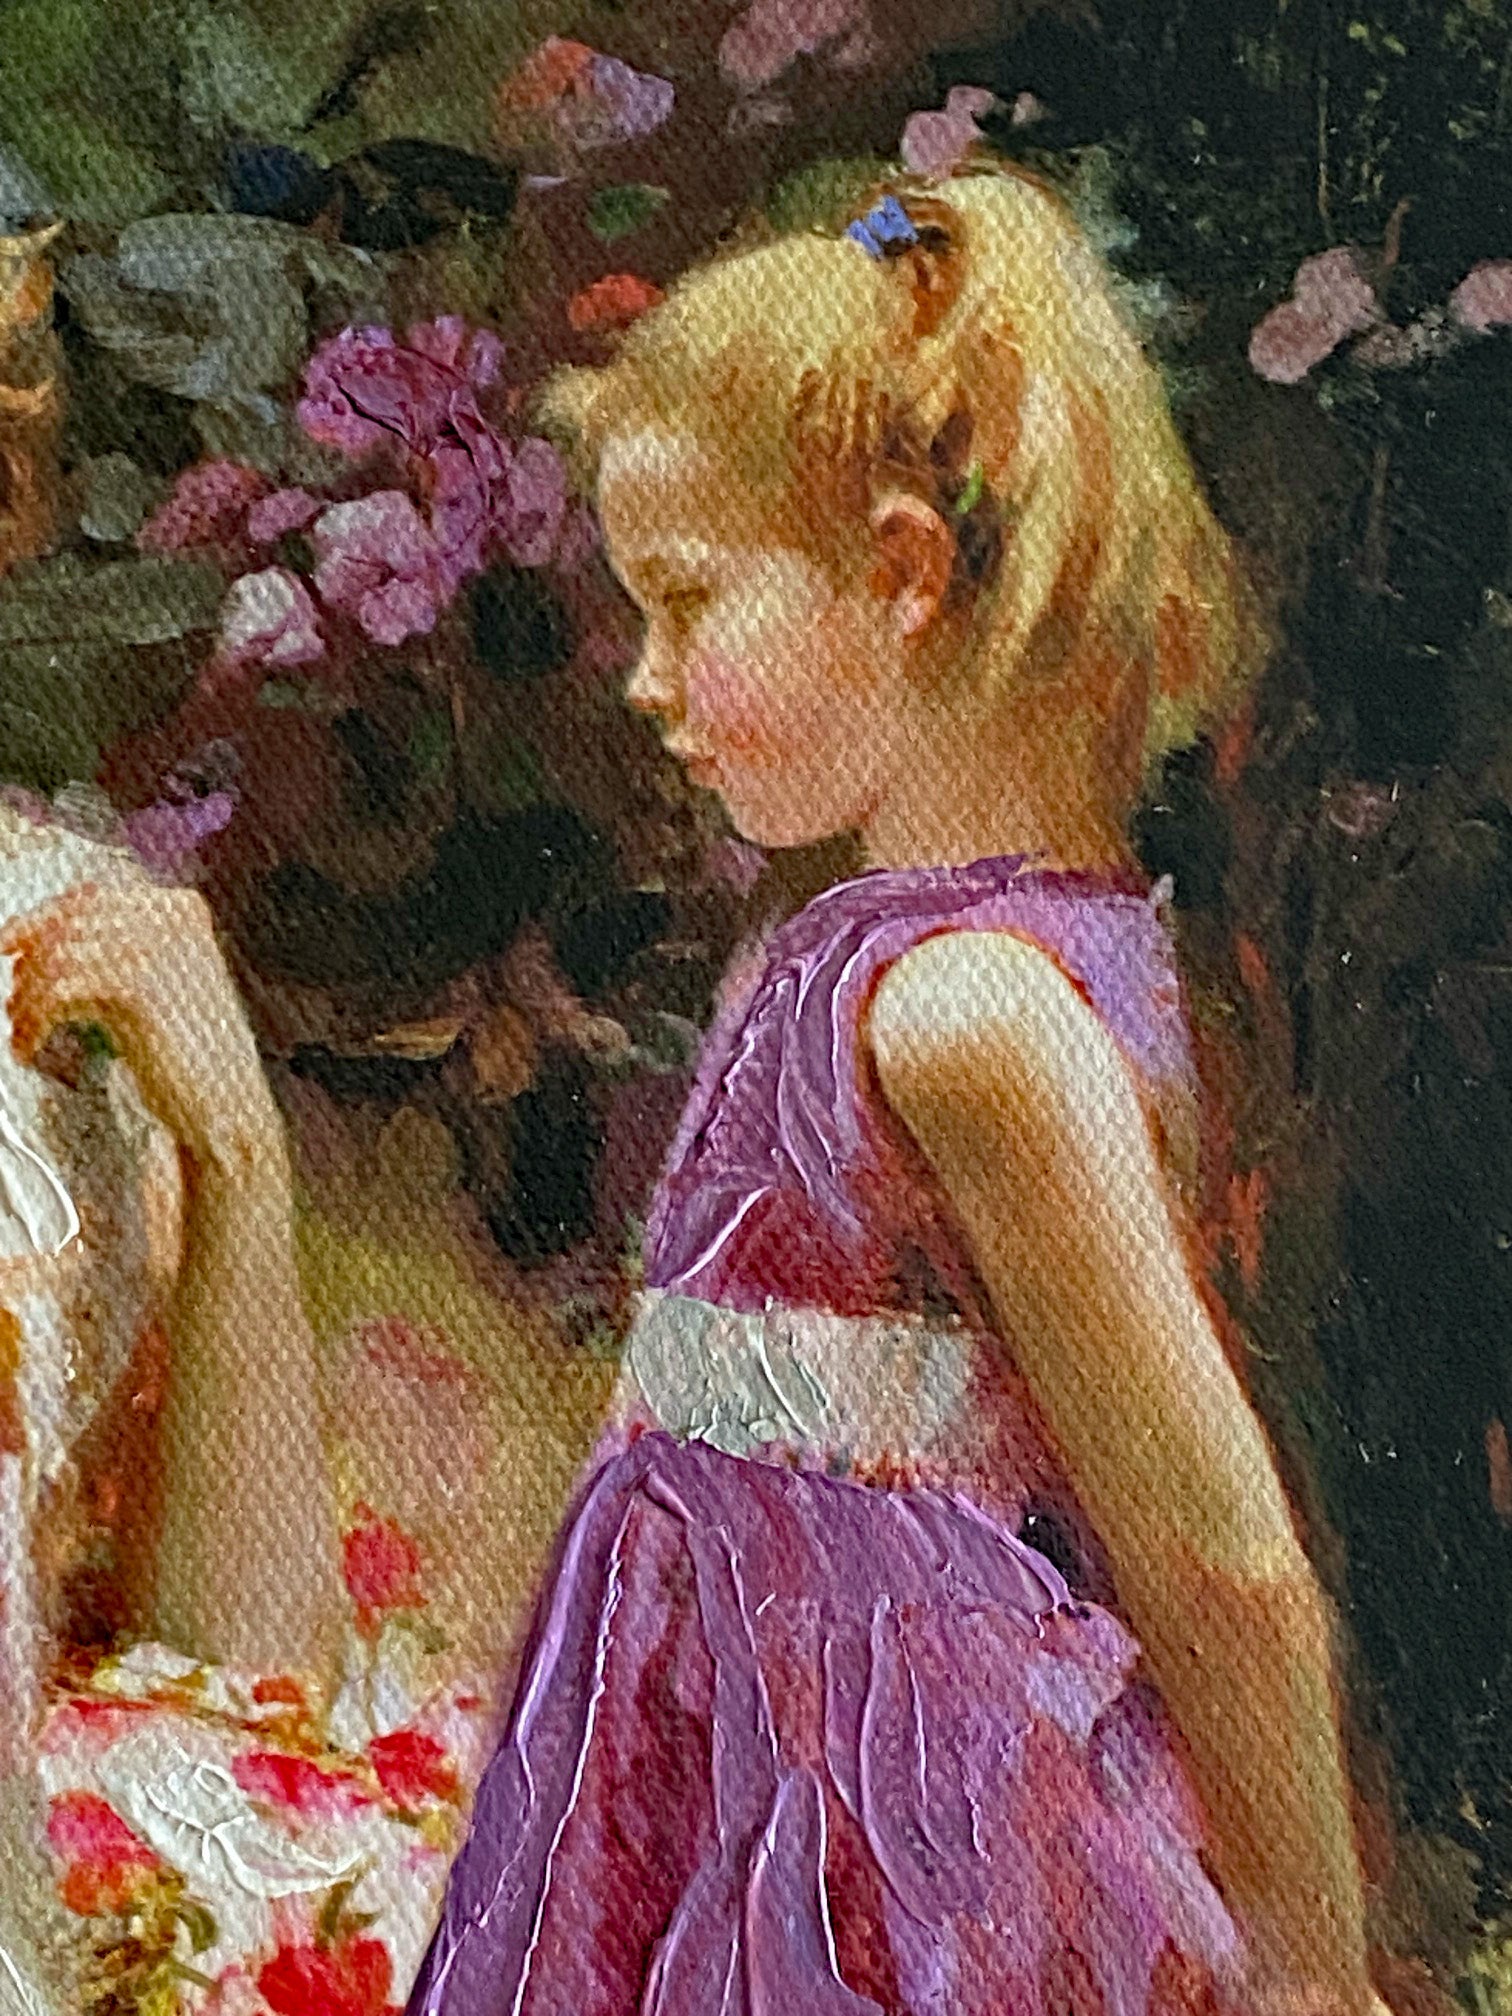 A Time to Remember Pino Daeni Artist Proof Canvas Giclée Print Artist Hand Embellished, Signed and AP Numbered